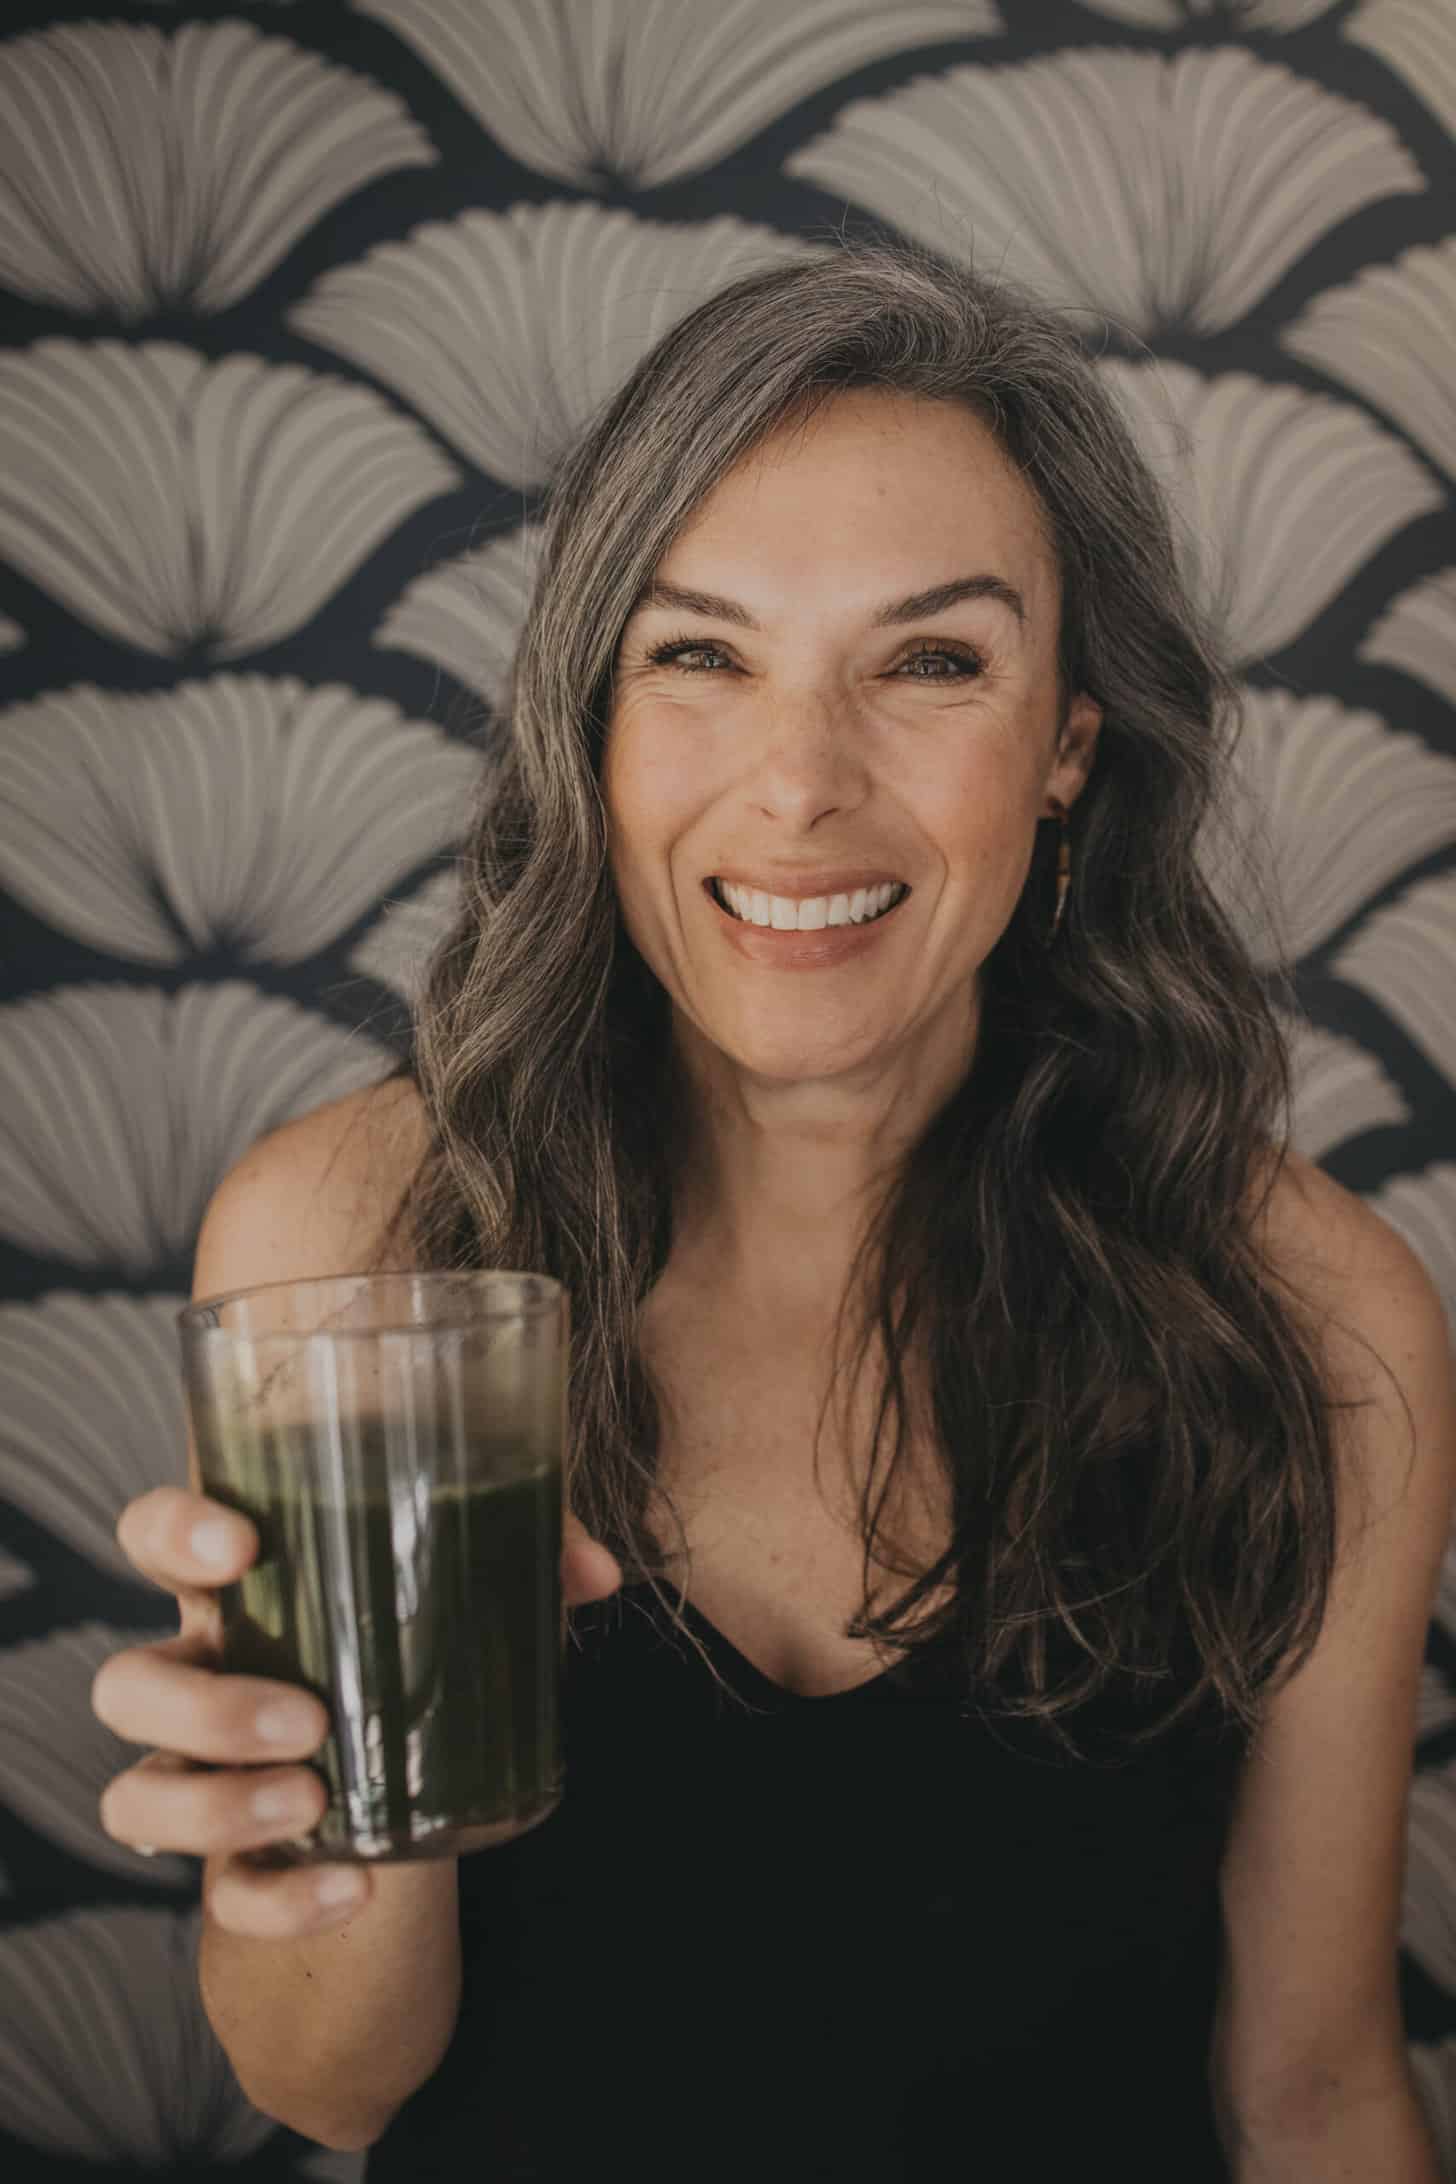 a woman with long wavy hair holds up a glass of green juice